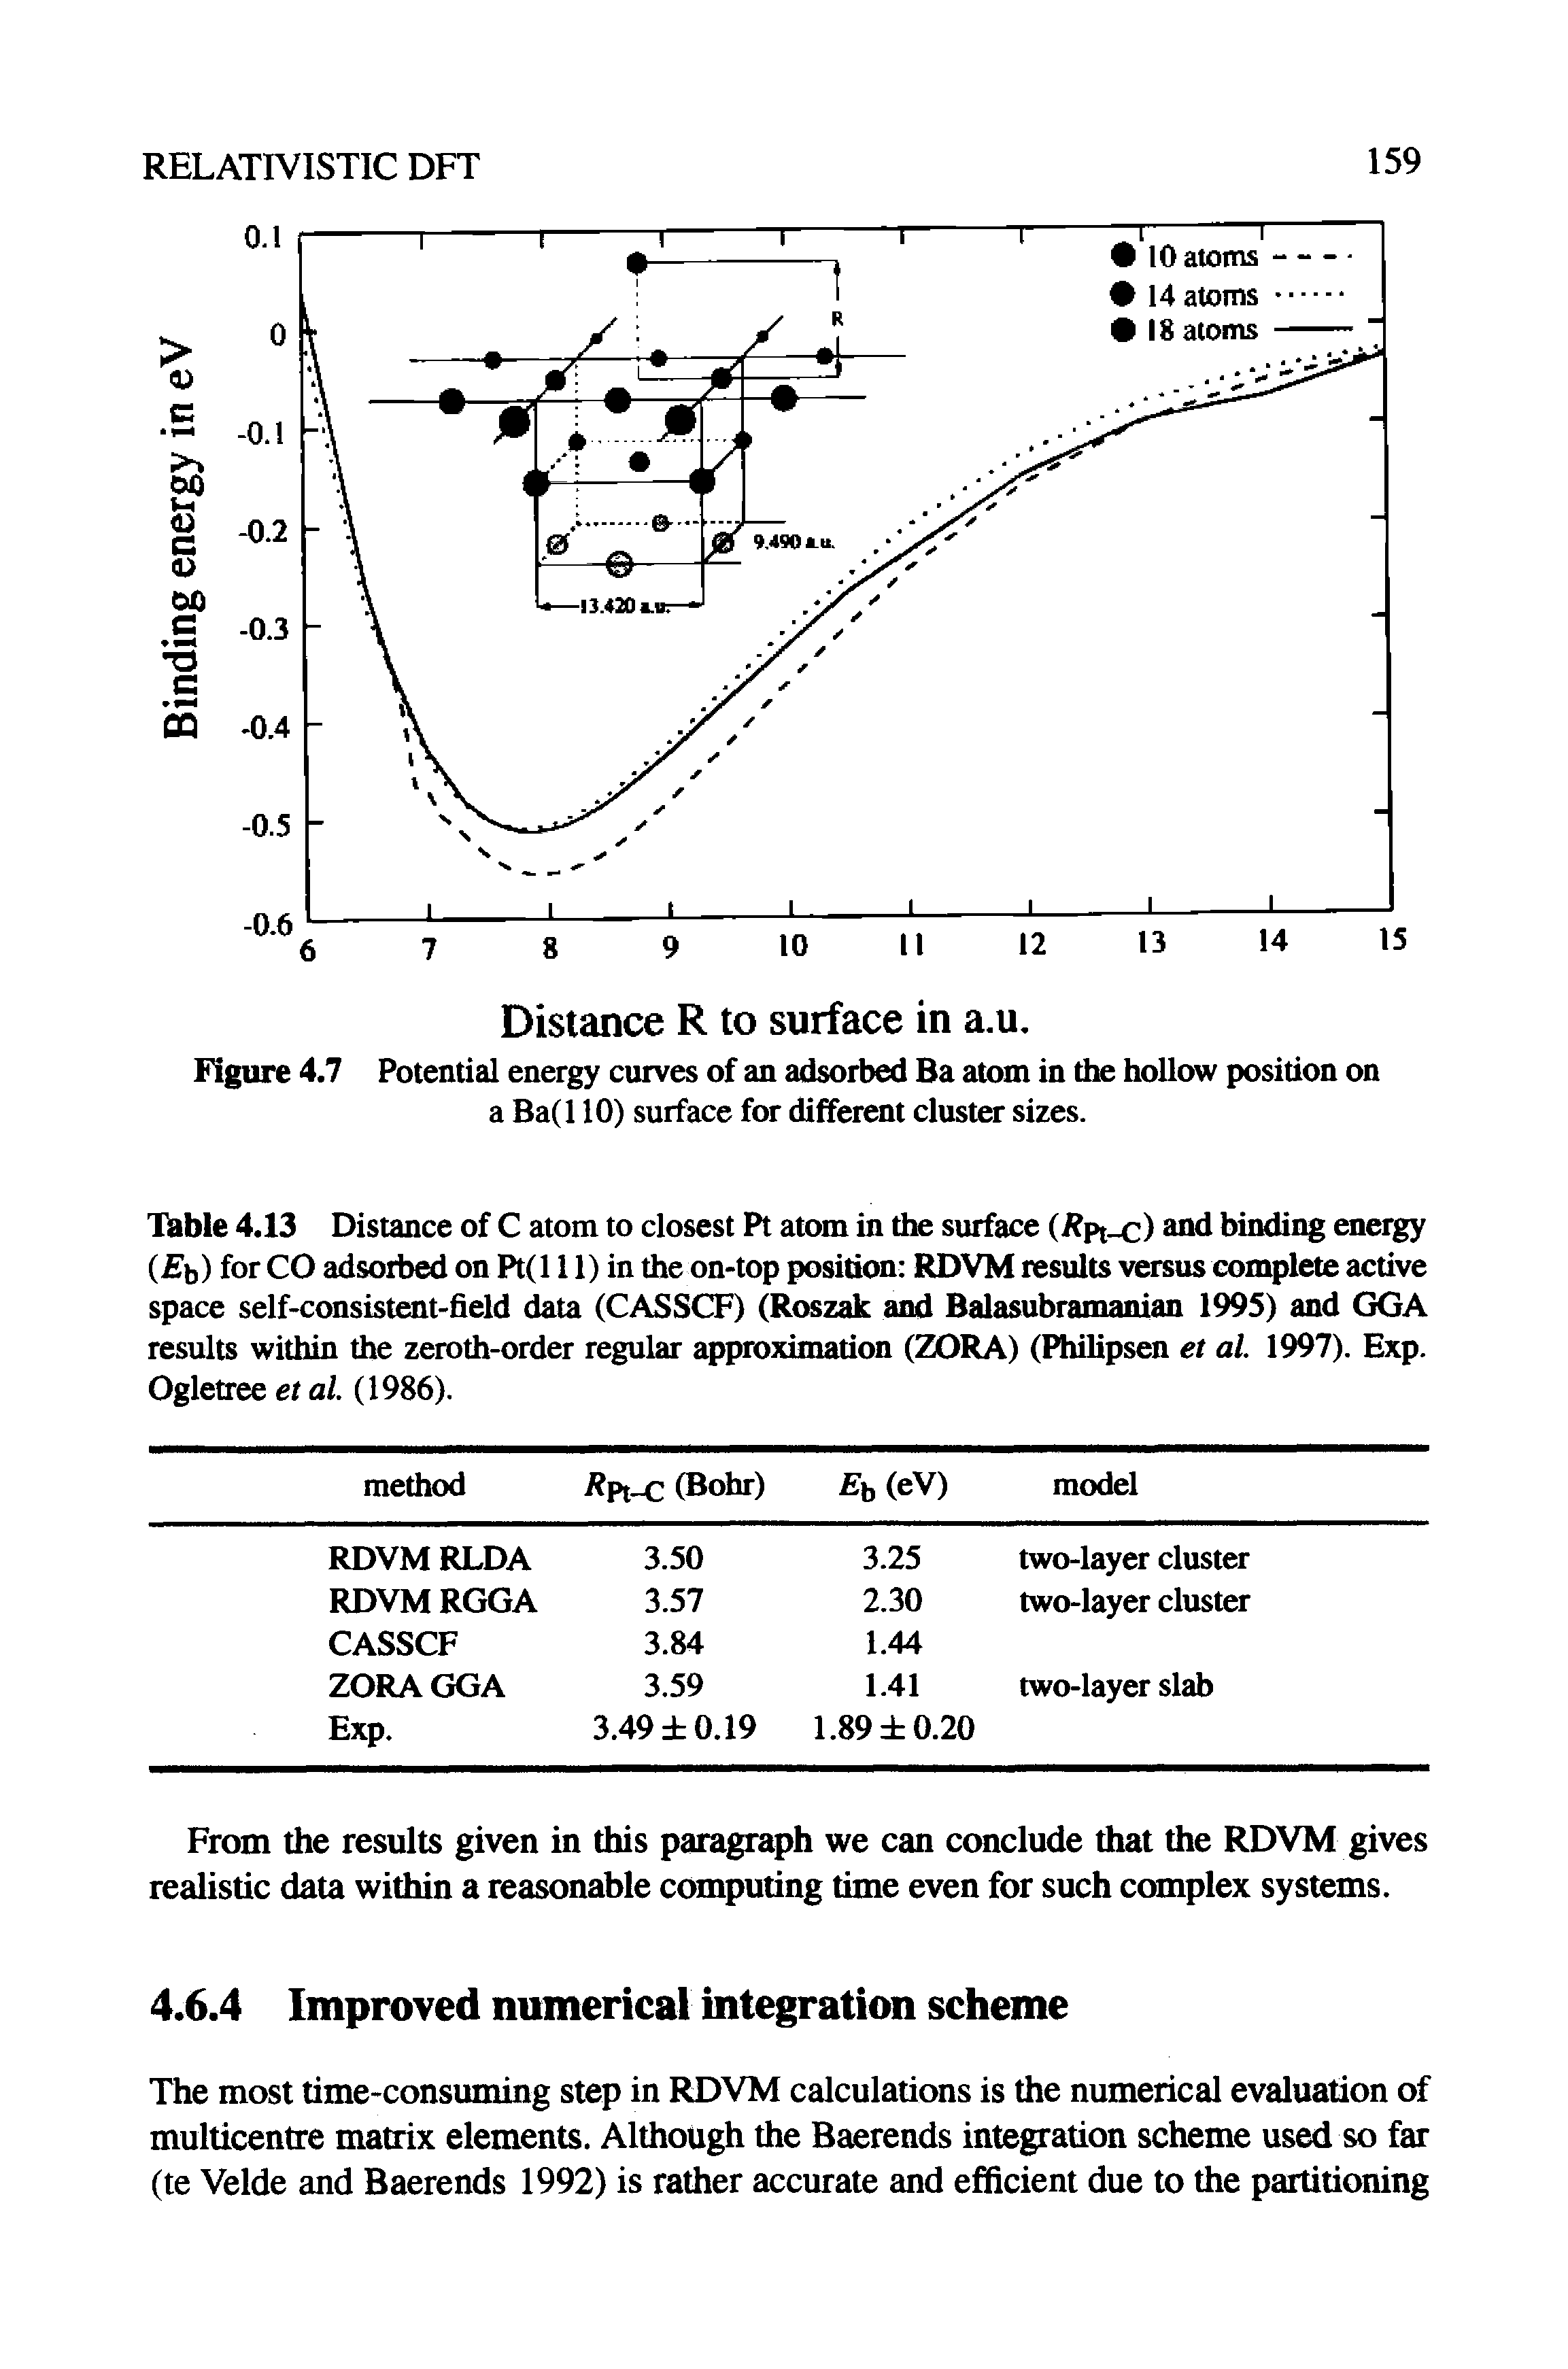 Table 4.13 Distance of C atom to closest Pt atom in the surface (Rpt-c) and binding energy ( b) for CO adsorbed on Pt(l 11) in the on-top position RDVM results versus complete active space self-consistent-field data (CASSCF) (Roszak and Balasubramanian 1995) and GGA results within the zeroth-order regular approximation (ZDRA) (Philipsen et al. 1997). Exp. Ogletree et al. (1986).